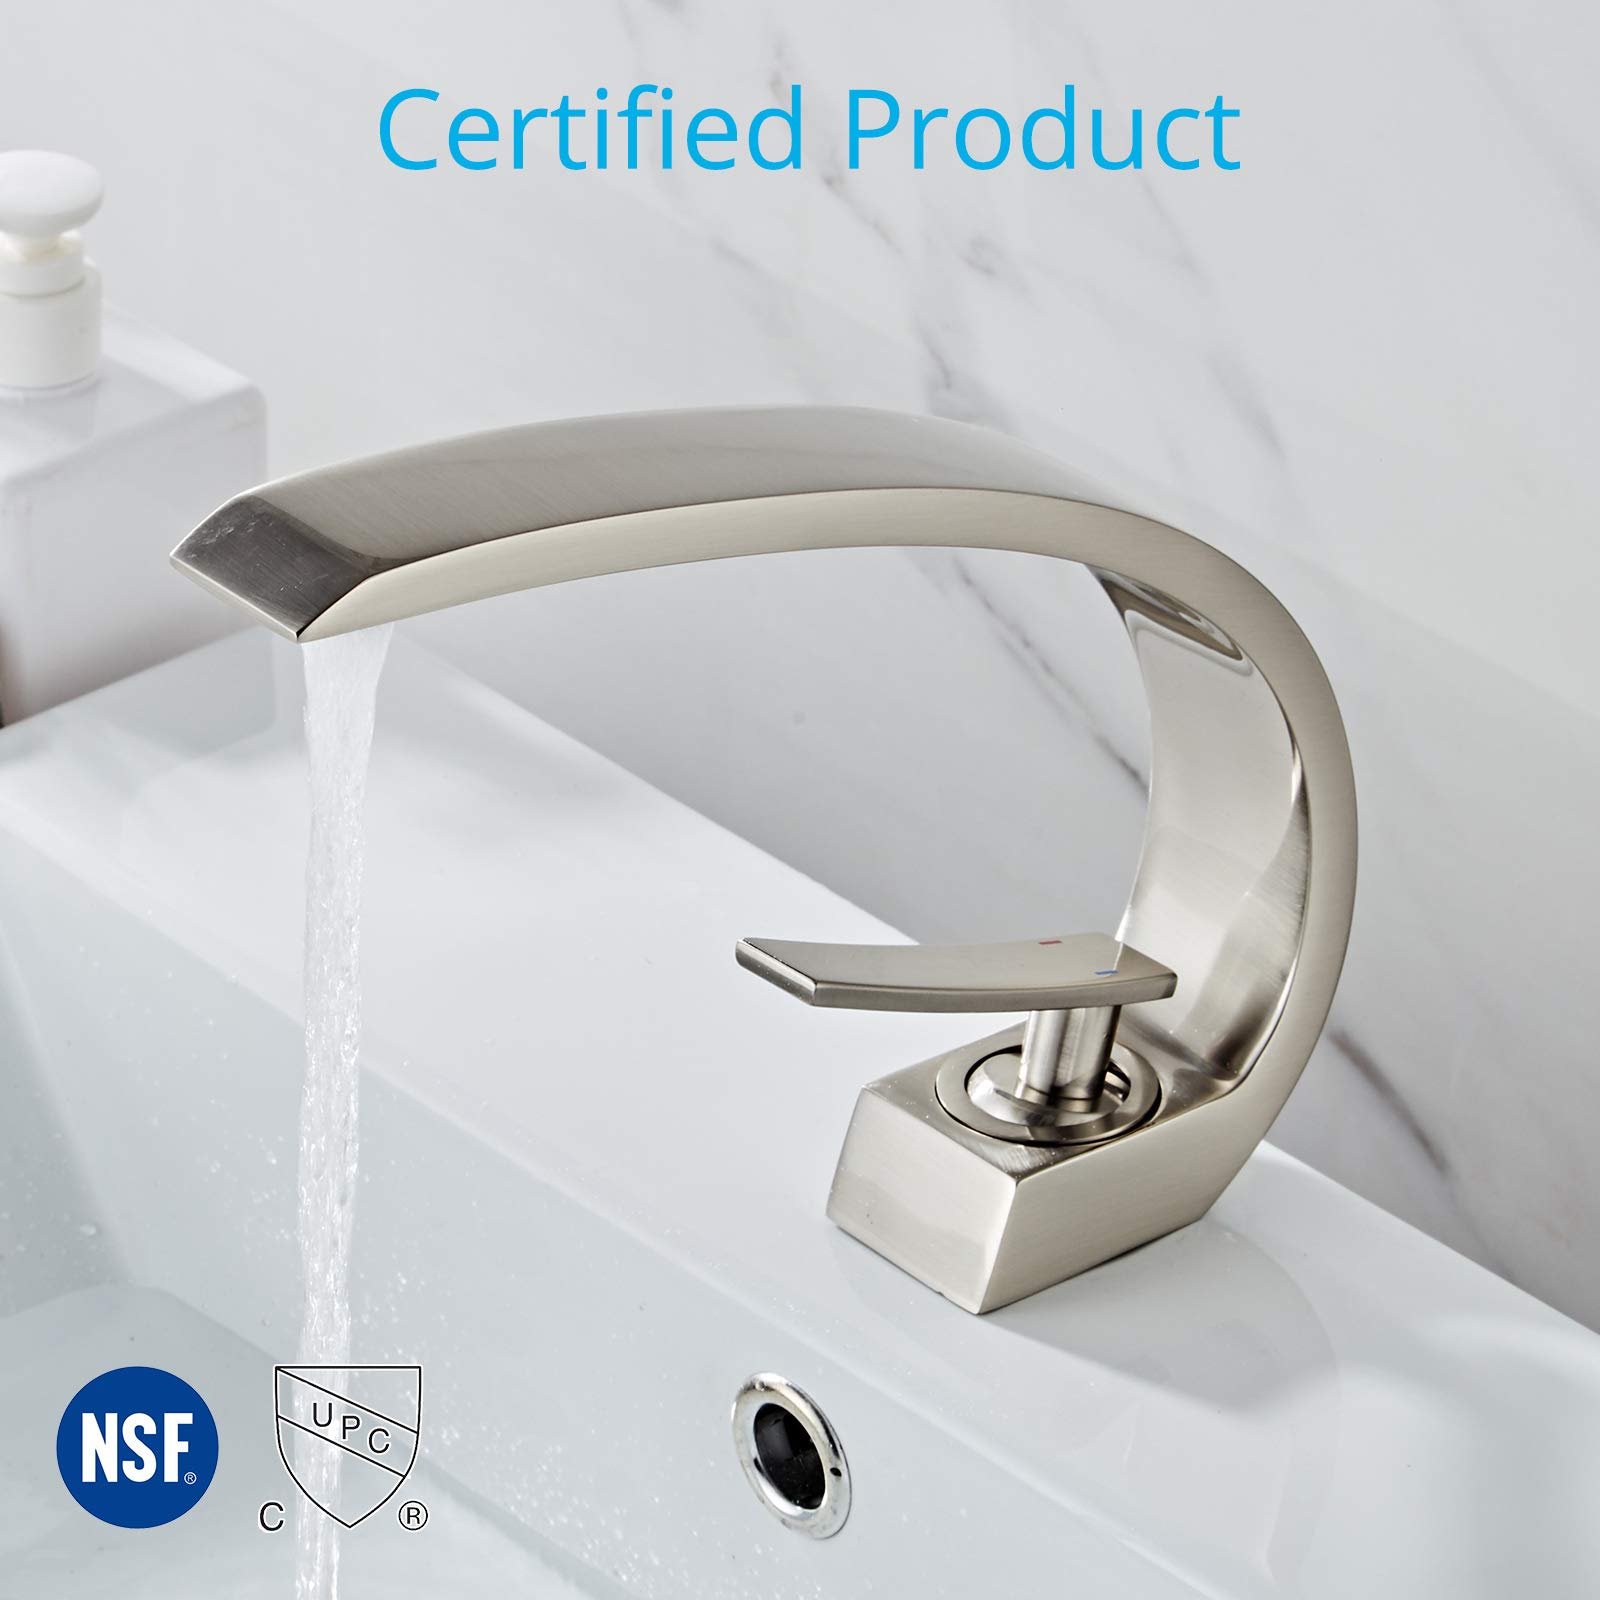 Wovier Brushed Nickel Bathroom Sink Faucet with Supply Hose,Unique Design Single Handle Single Hole Lavatory Faucet,Basin Mixer Tap Commercial